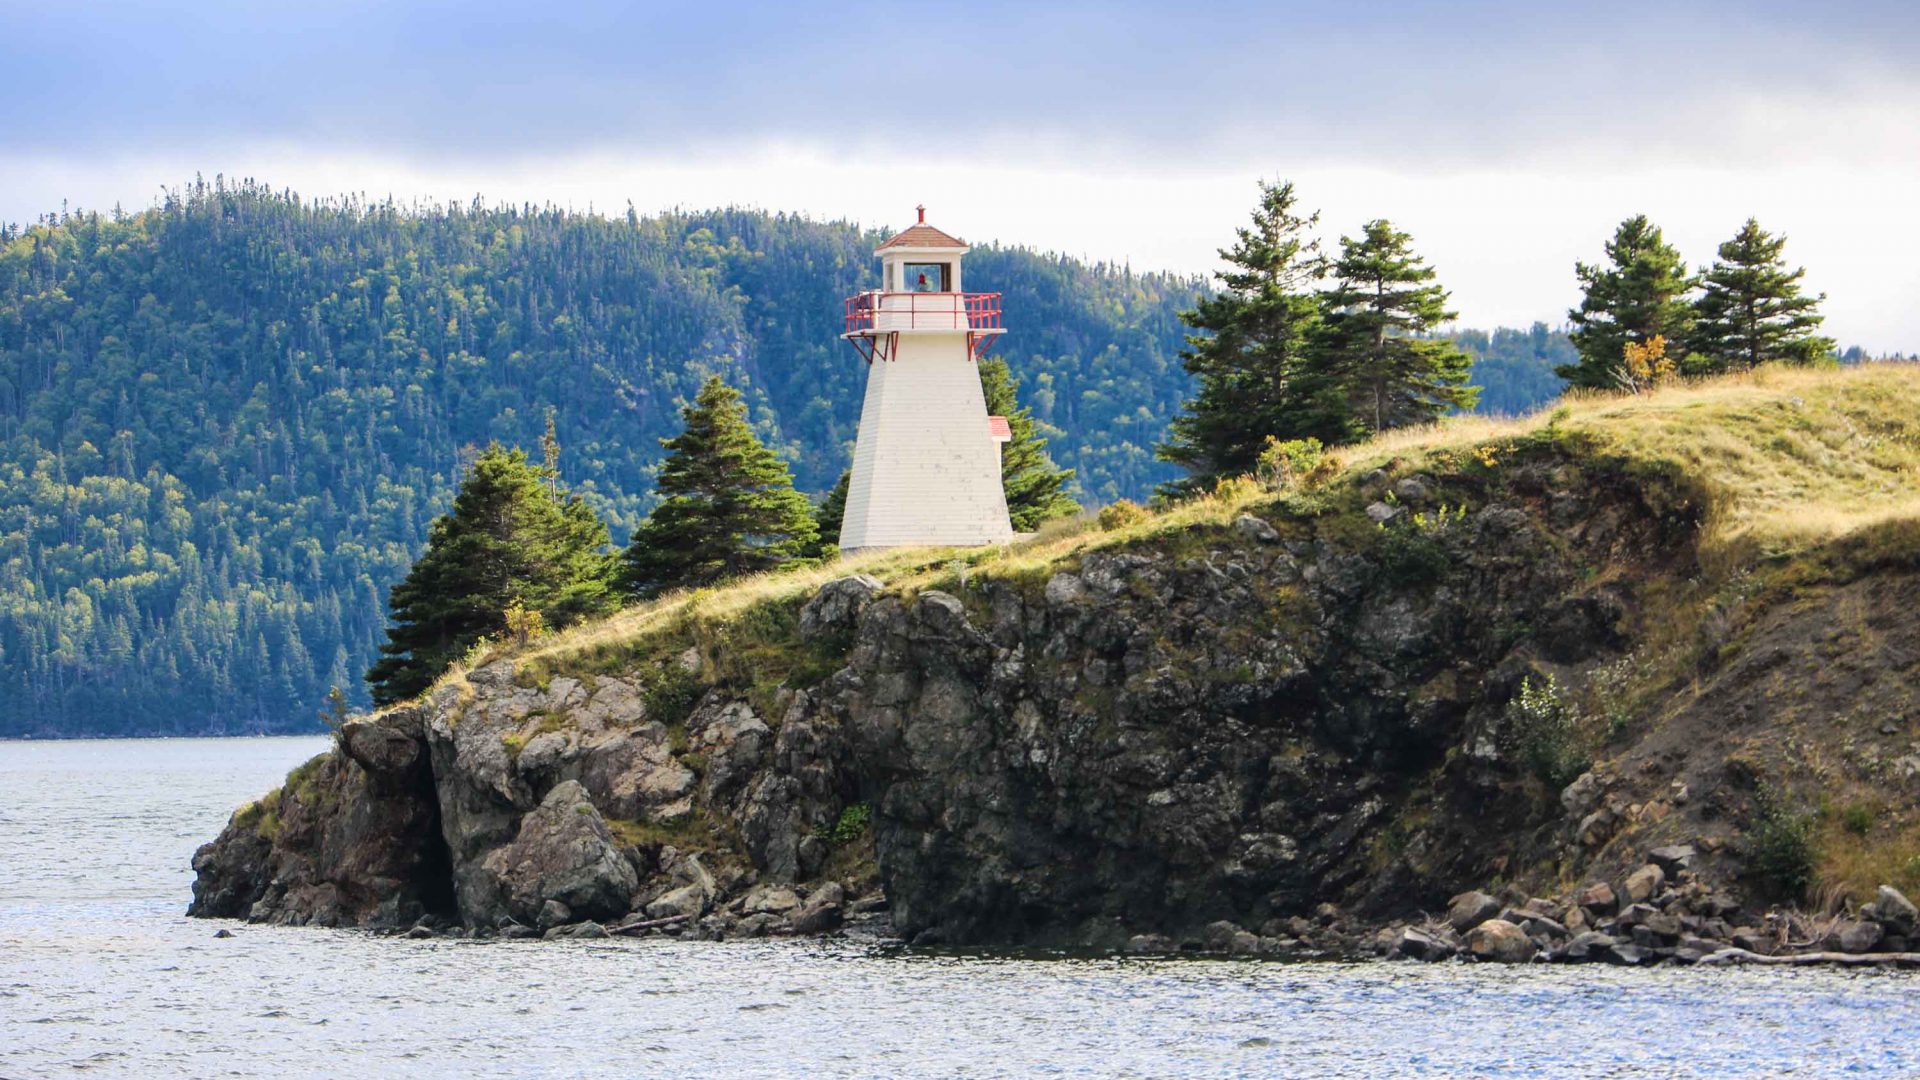 A lighthouse in picturesque, far-flung Newfoundland.